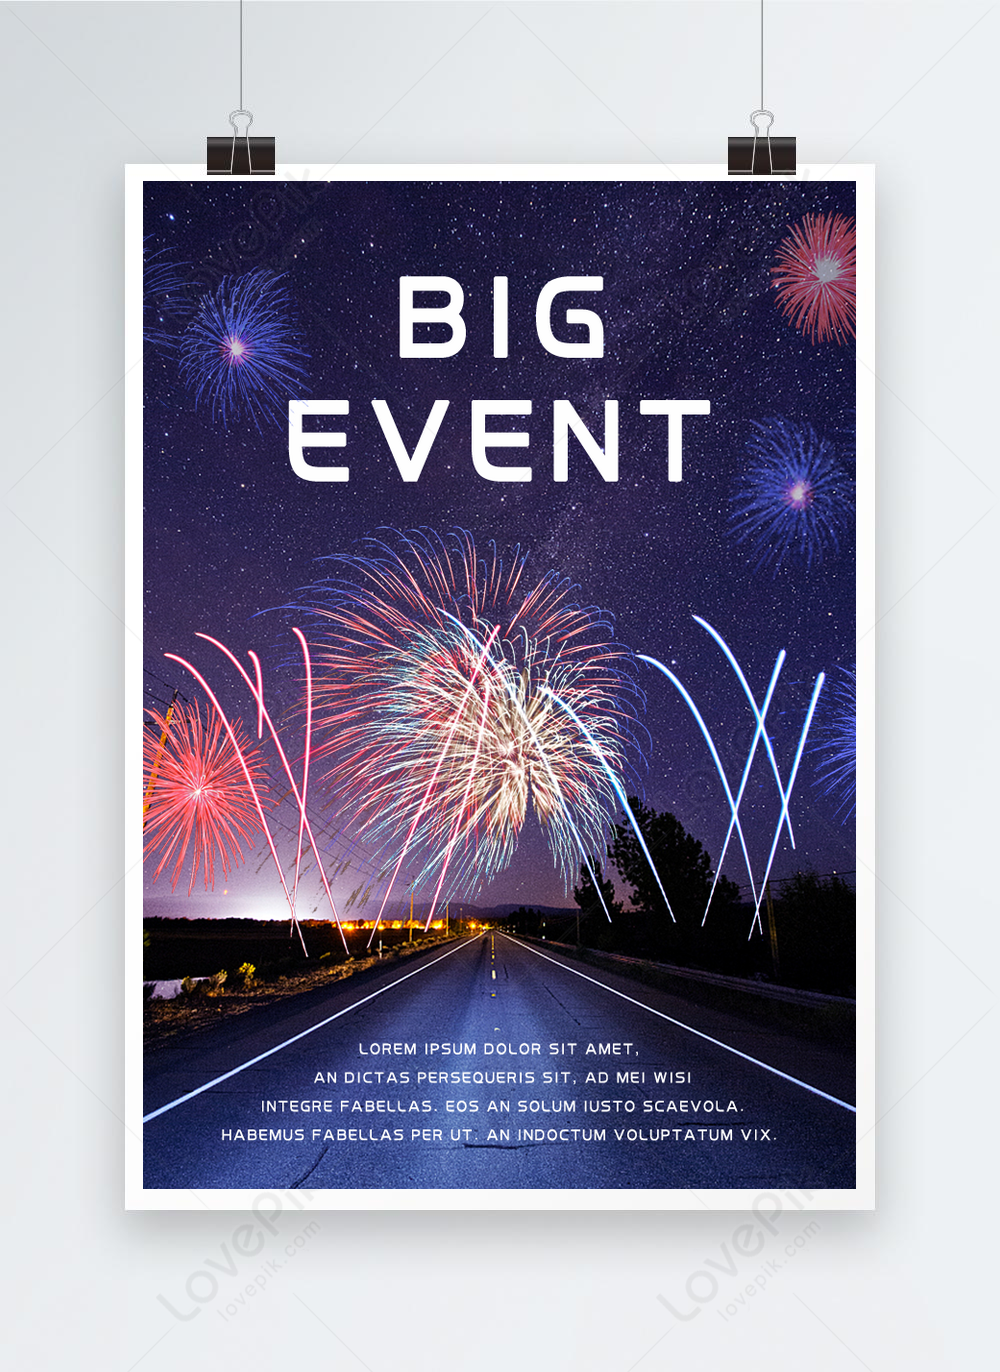 Download Blue Nightscape City Fireworks Background Poster Template Image Picture Free Download 463710774 Lovepik Com